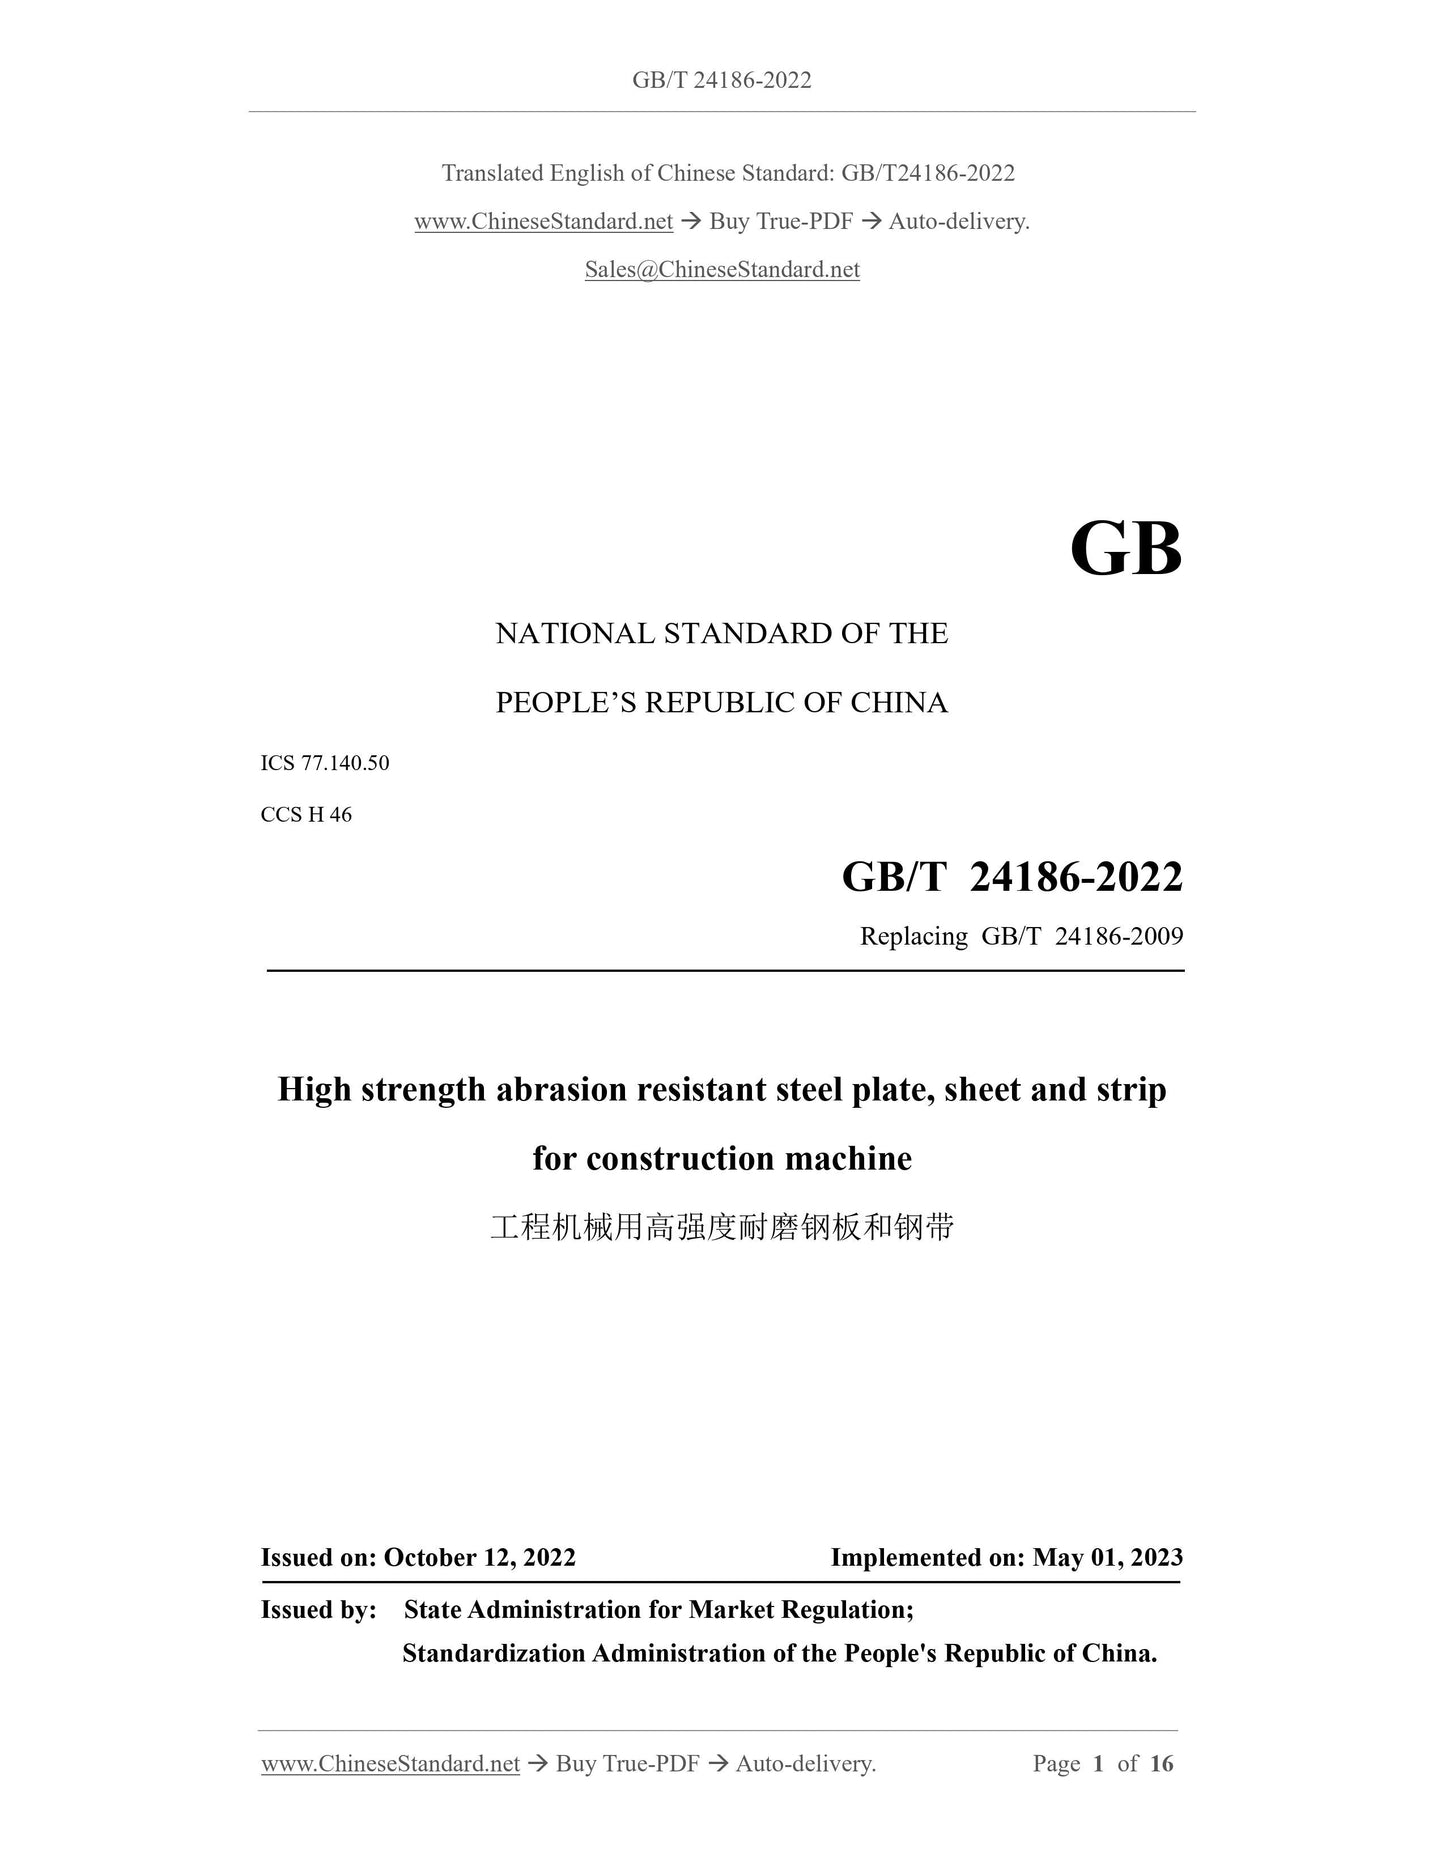 GB/T 24186-2022 Page 1